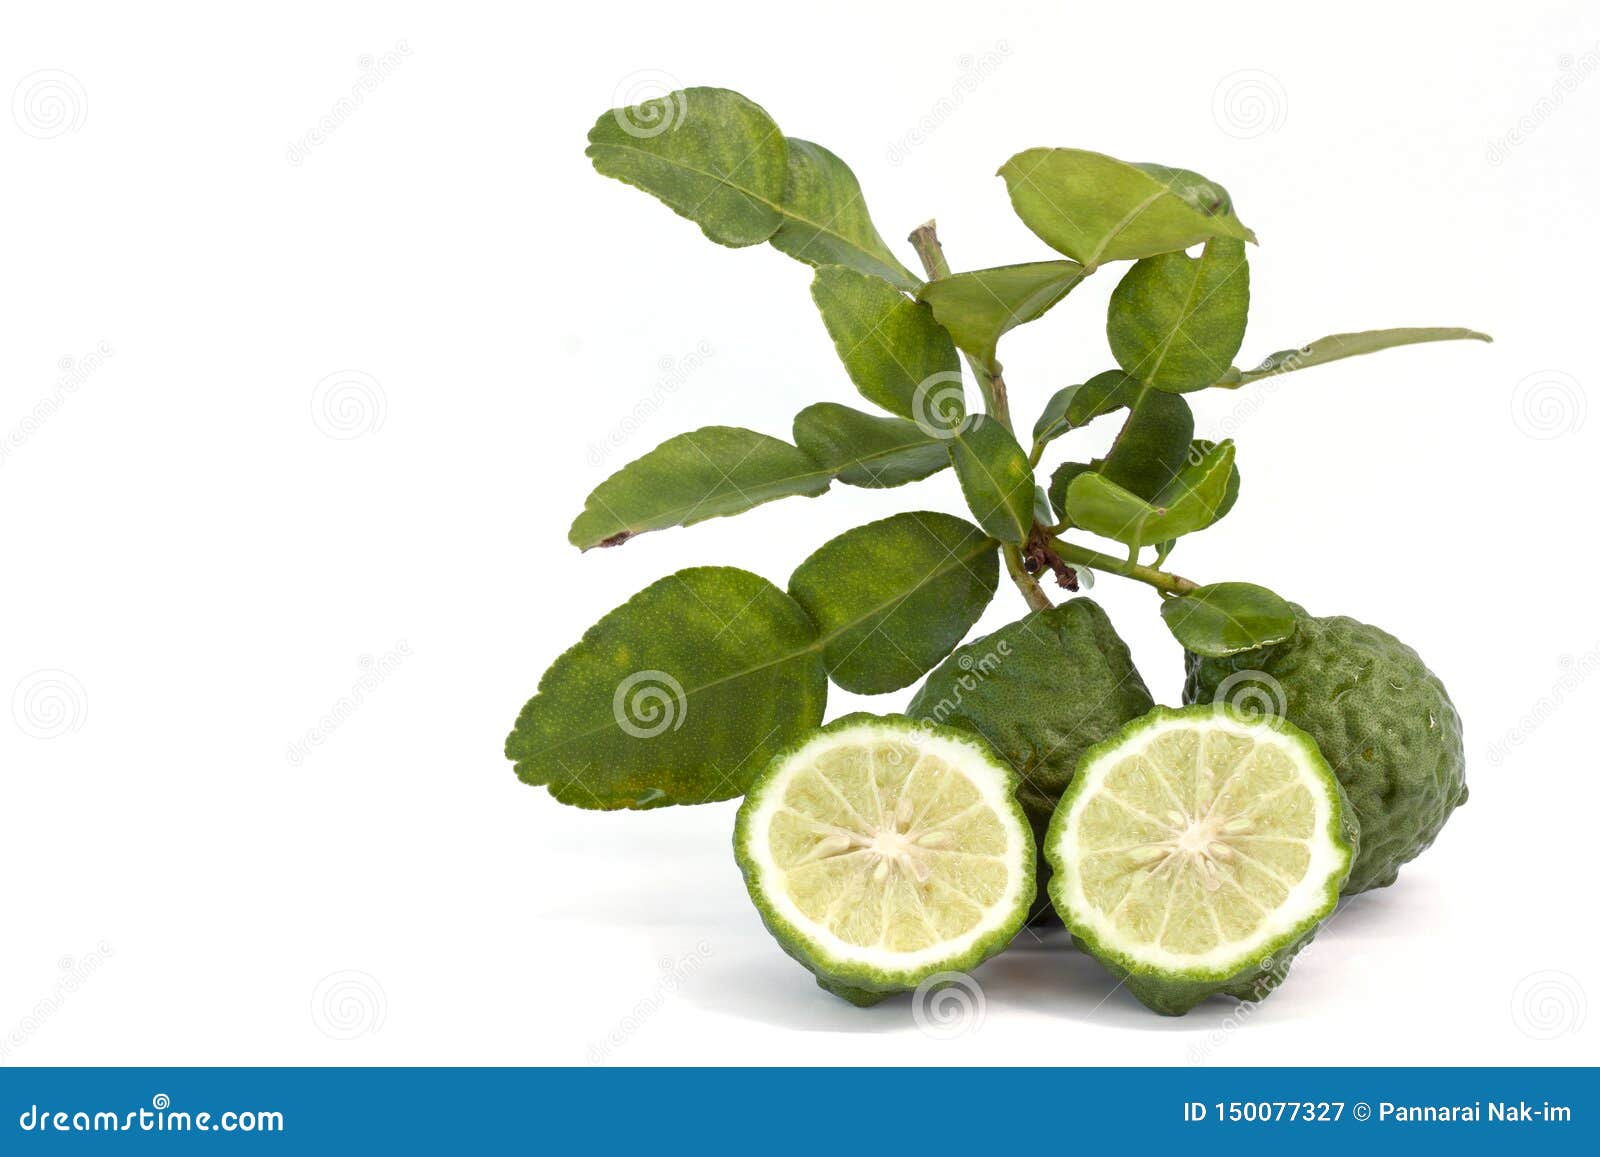 Fresh Bergamot Fruit With Leaf Is A Vegetable And Herb Of Thailand Used As An Ingredient In Cooking And Herbal Stock Image Image Of Agriculture Herbal 150077327